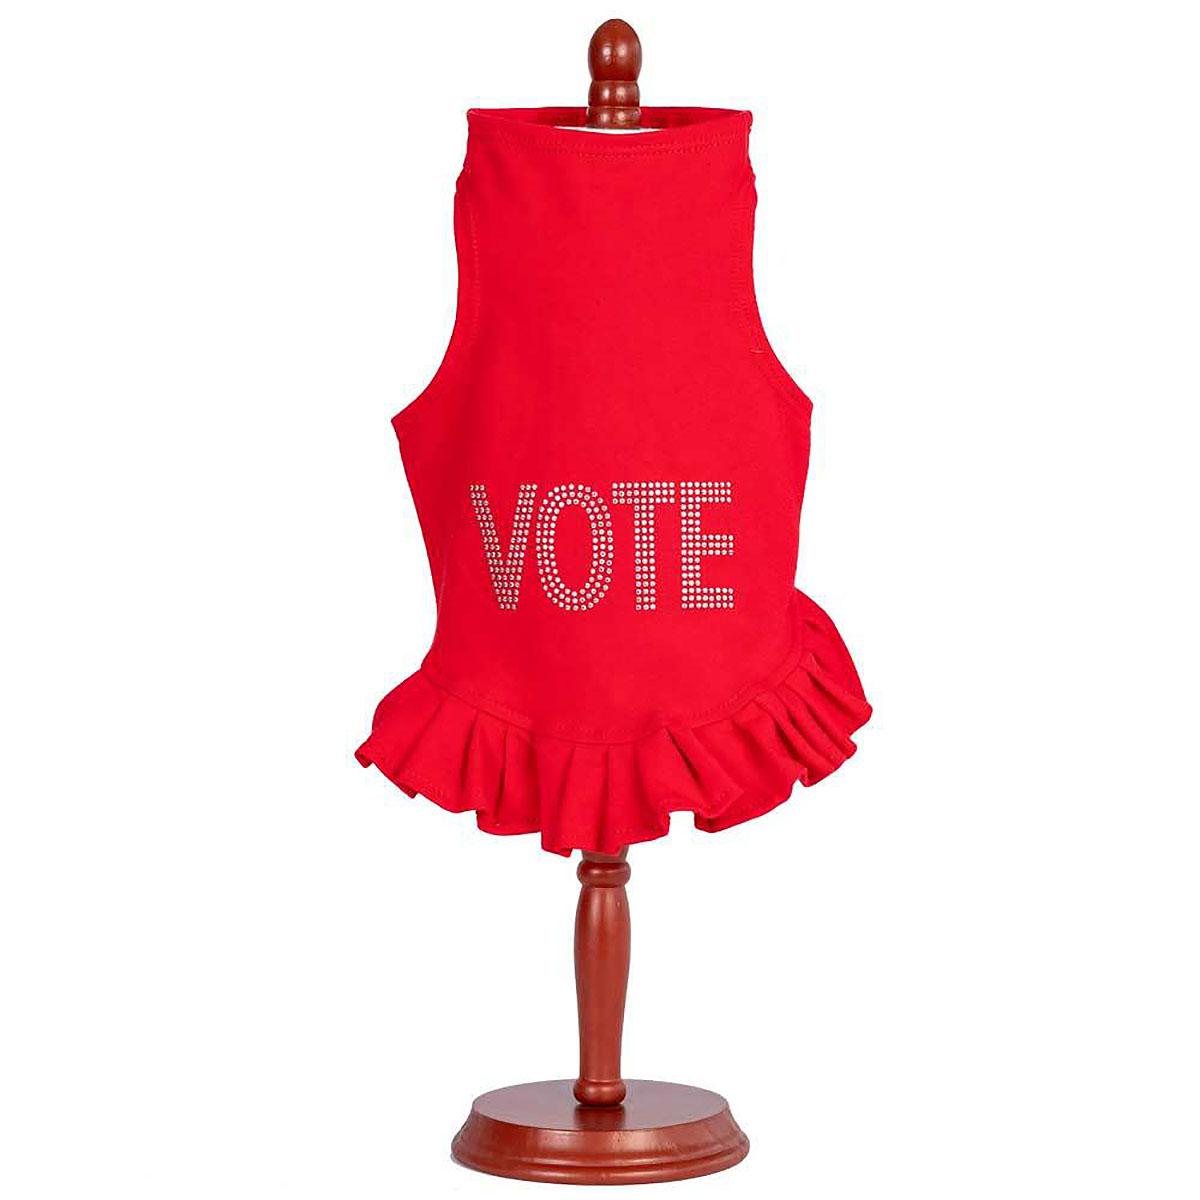 Daisy & Lucy Vote Dog Dress - Red